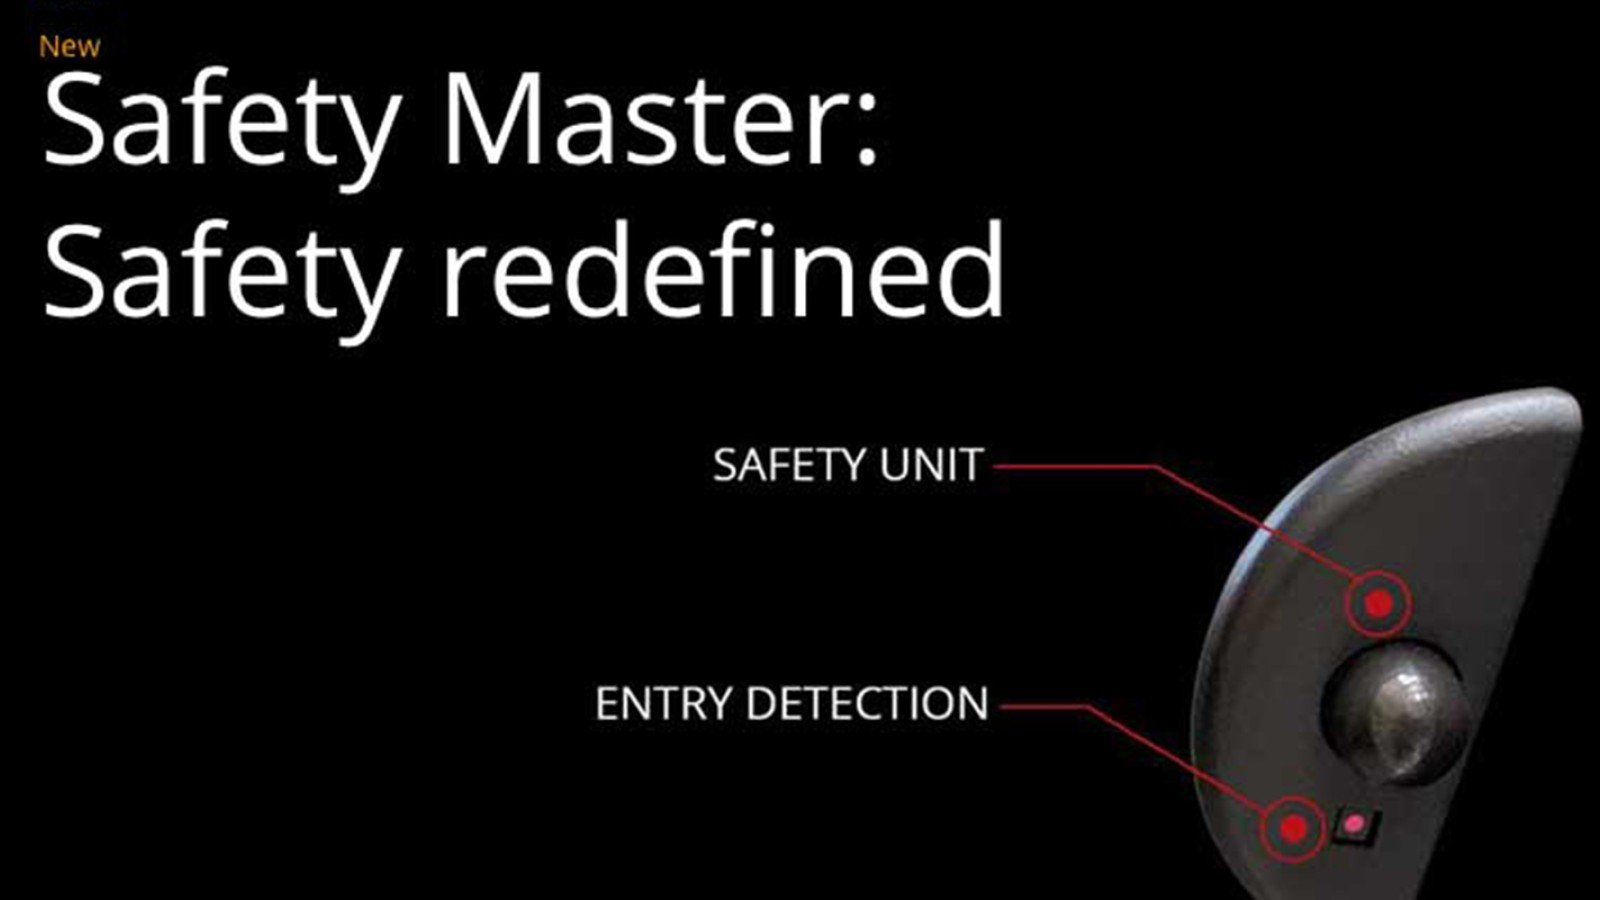 New product release: Safety Master